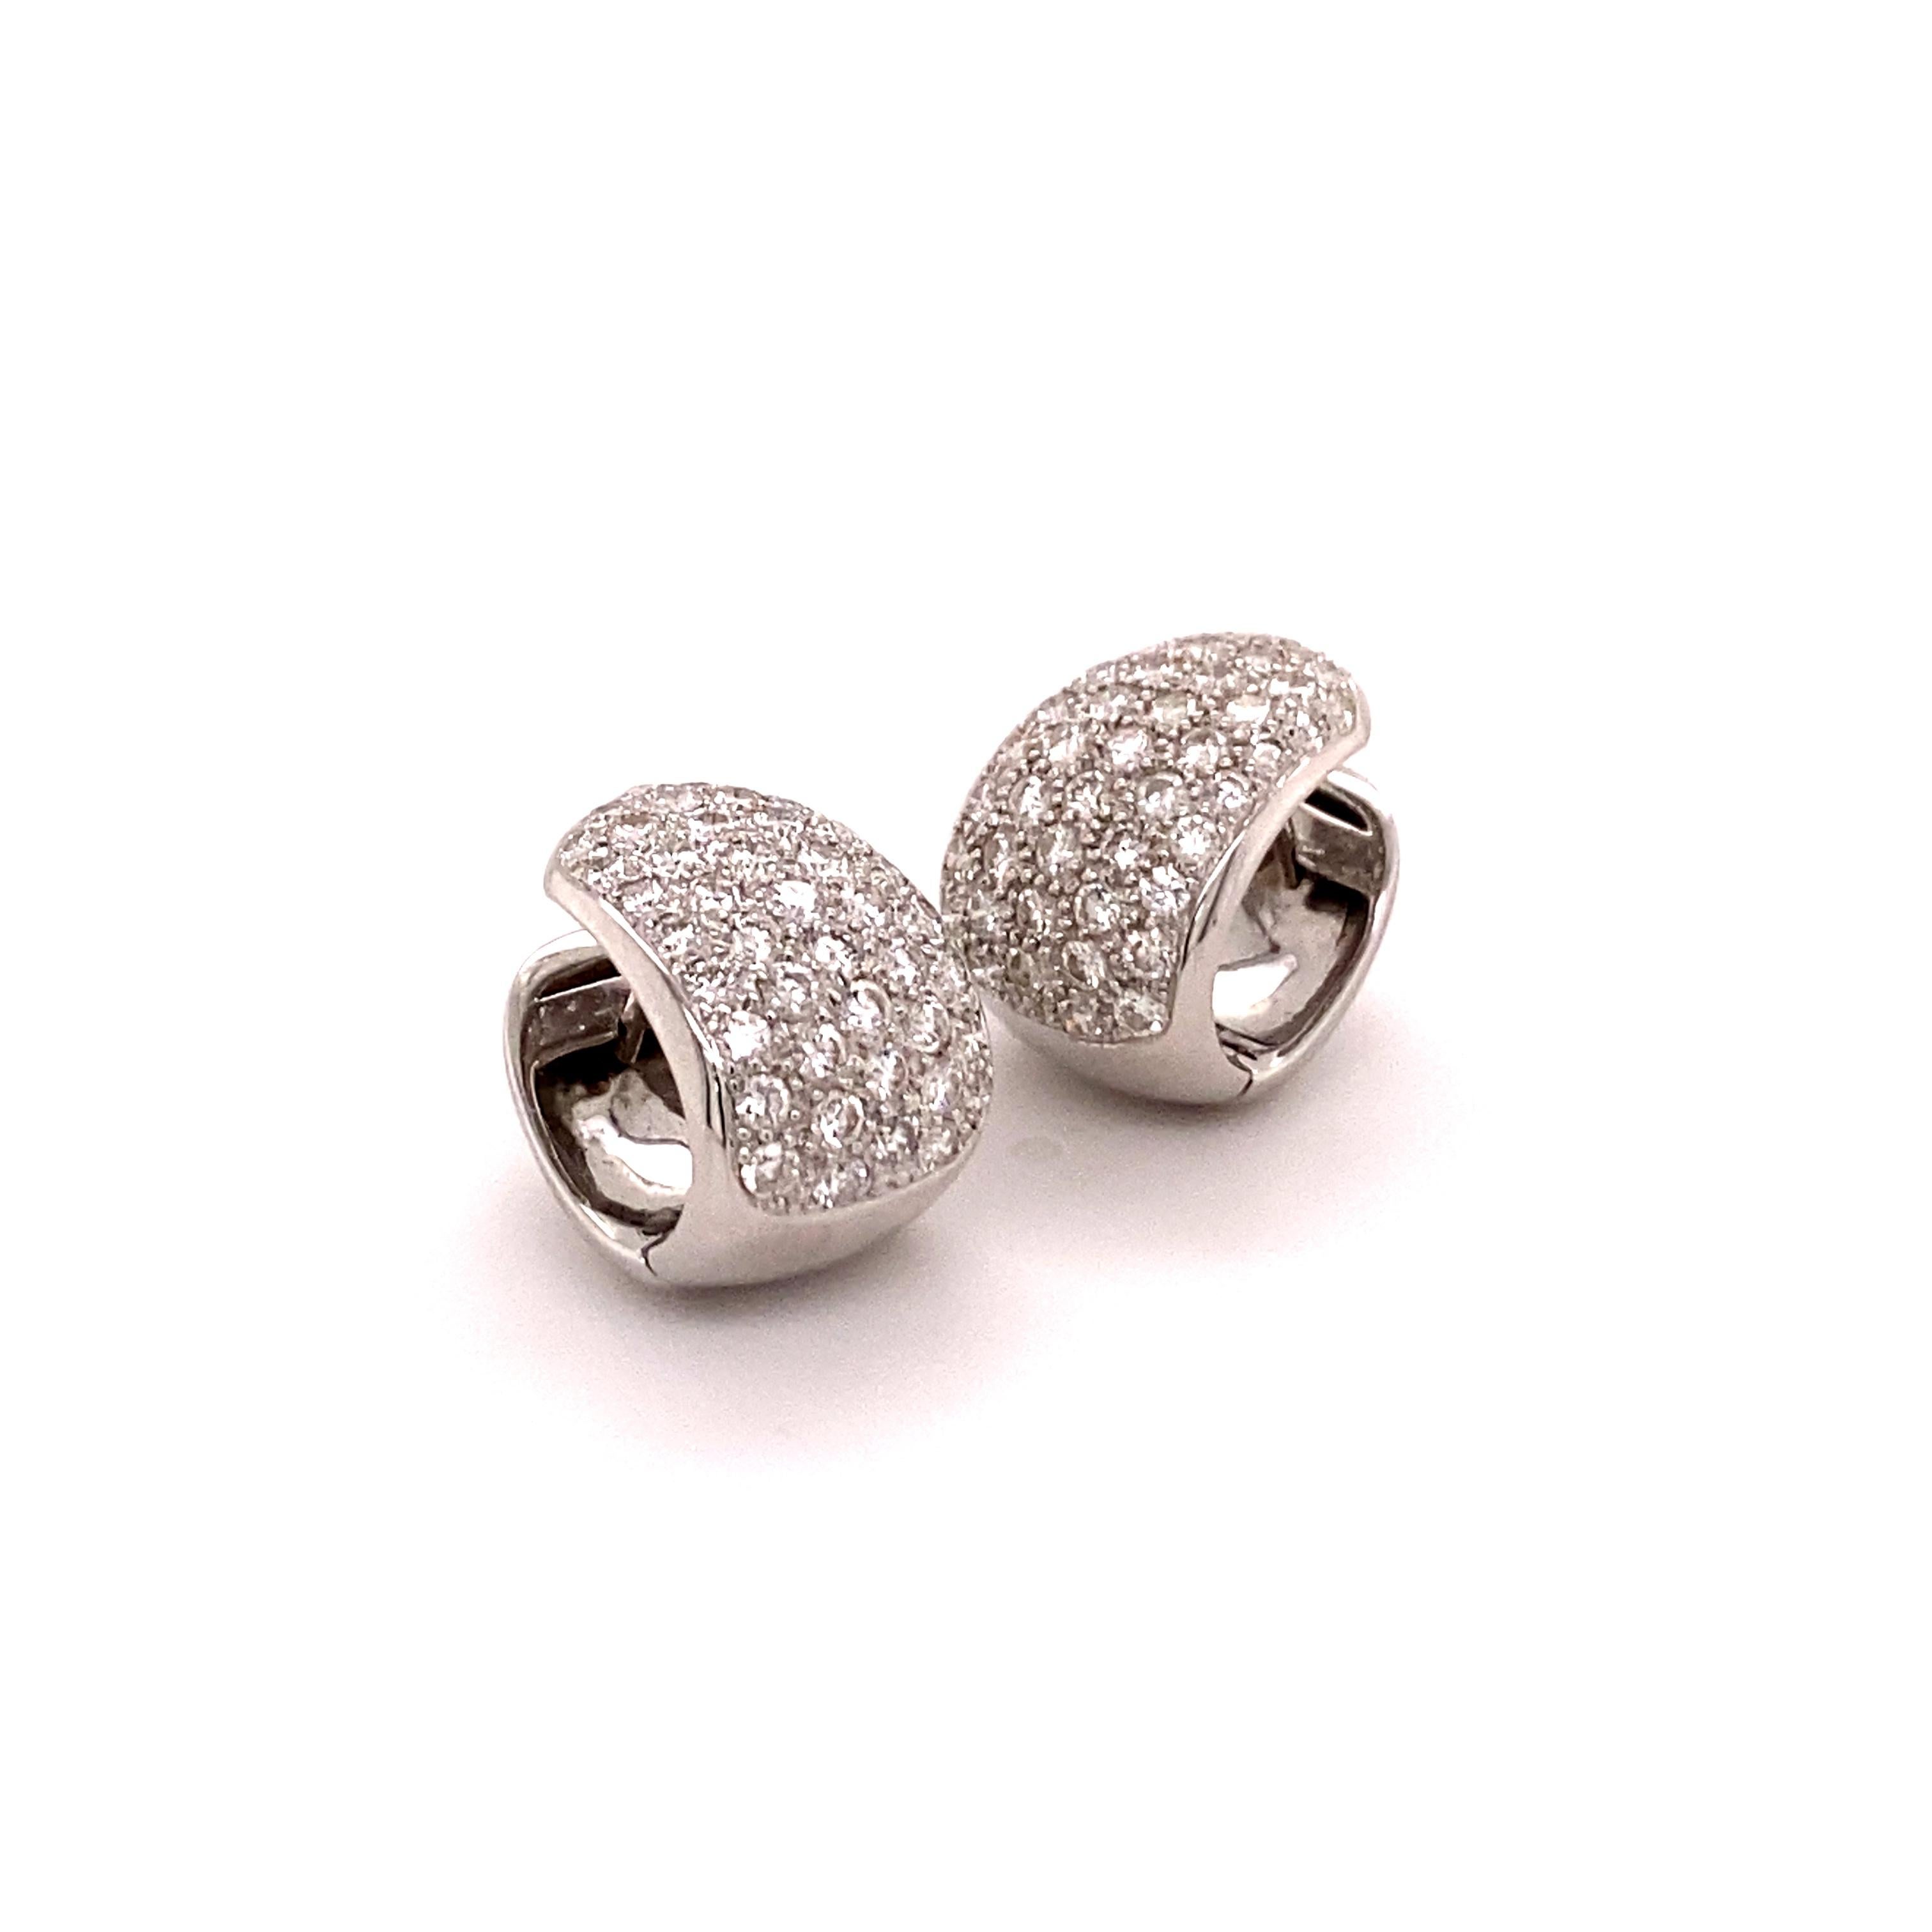 Elegant and classic diamond clip-on earrings crafted in 18K white gold. Two pavé set beds with a total of 86 brilliant-cut diamonds together weighing 1.72 carats . The diamonds are of G/H colour and si clarity.

A must have in every modern jewellery